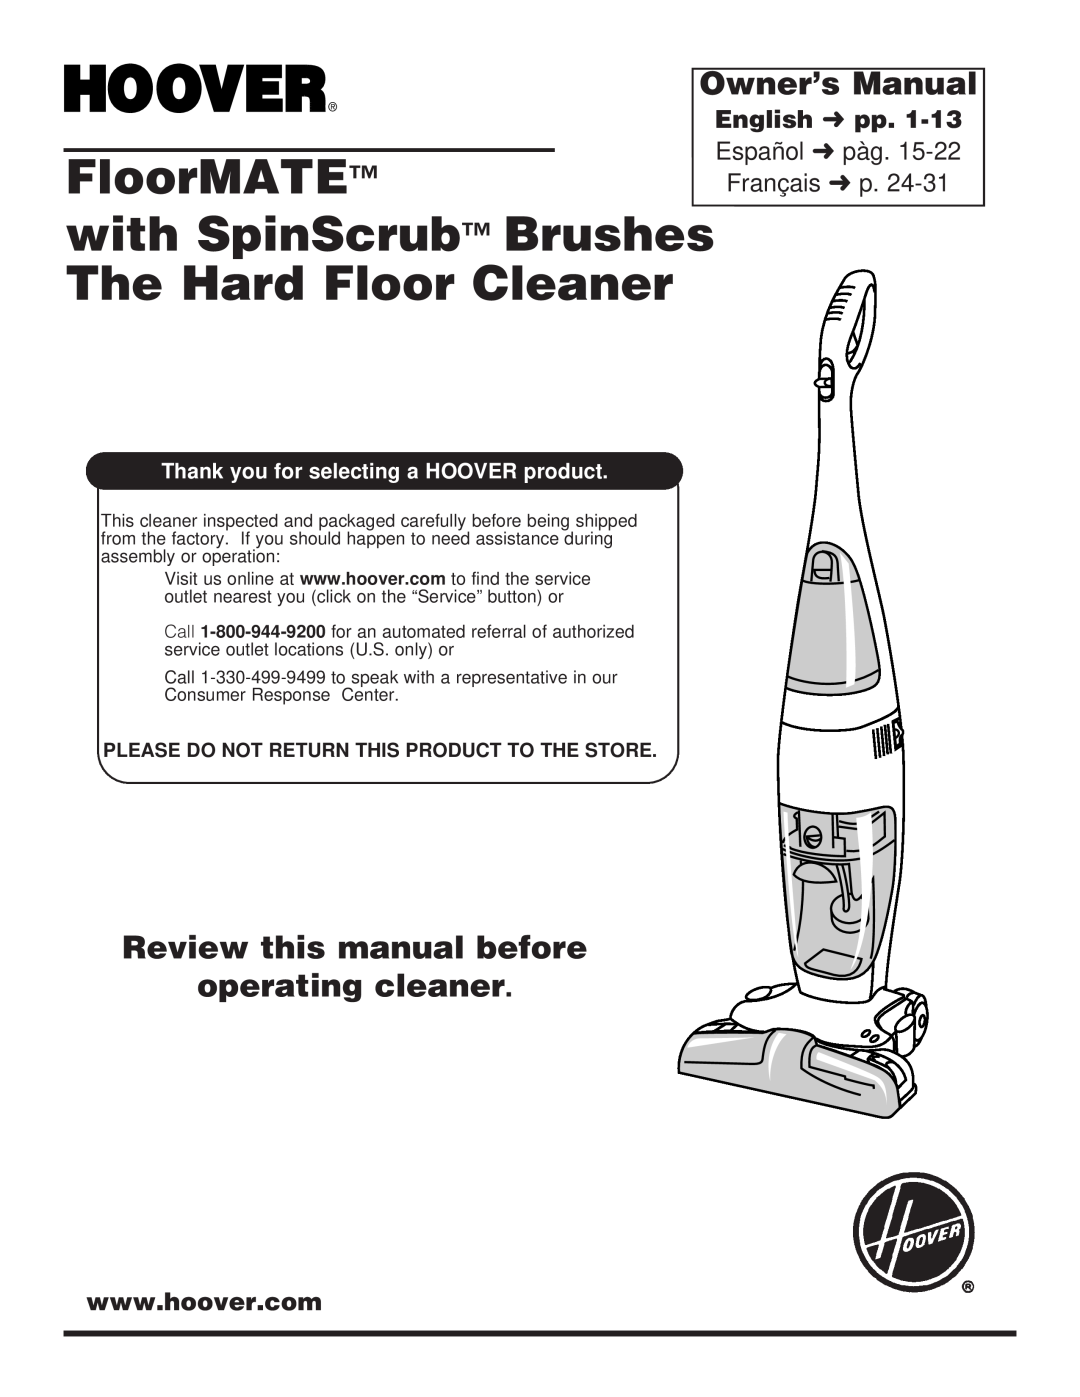 Hoover Floor Mate with Spin Scrub Brushes The Hard Floor Cleaner owner manual Review this manual before operating cleaner 